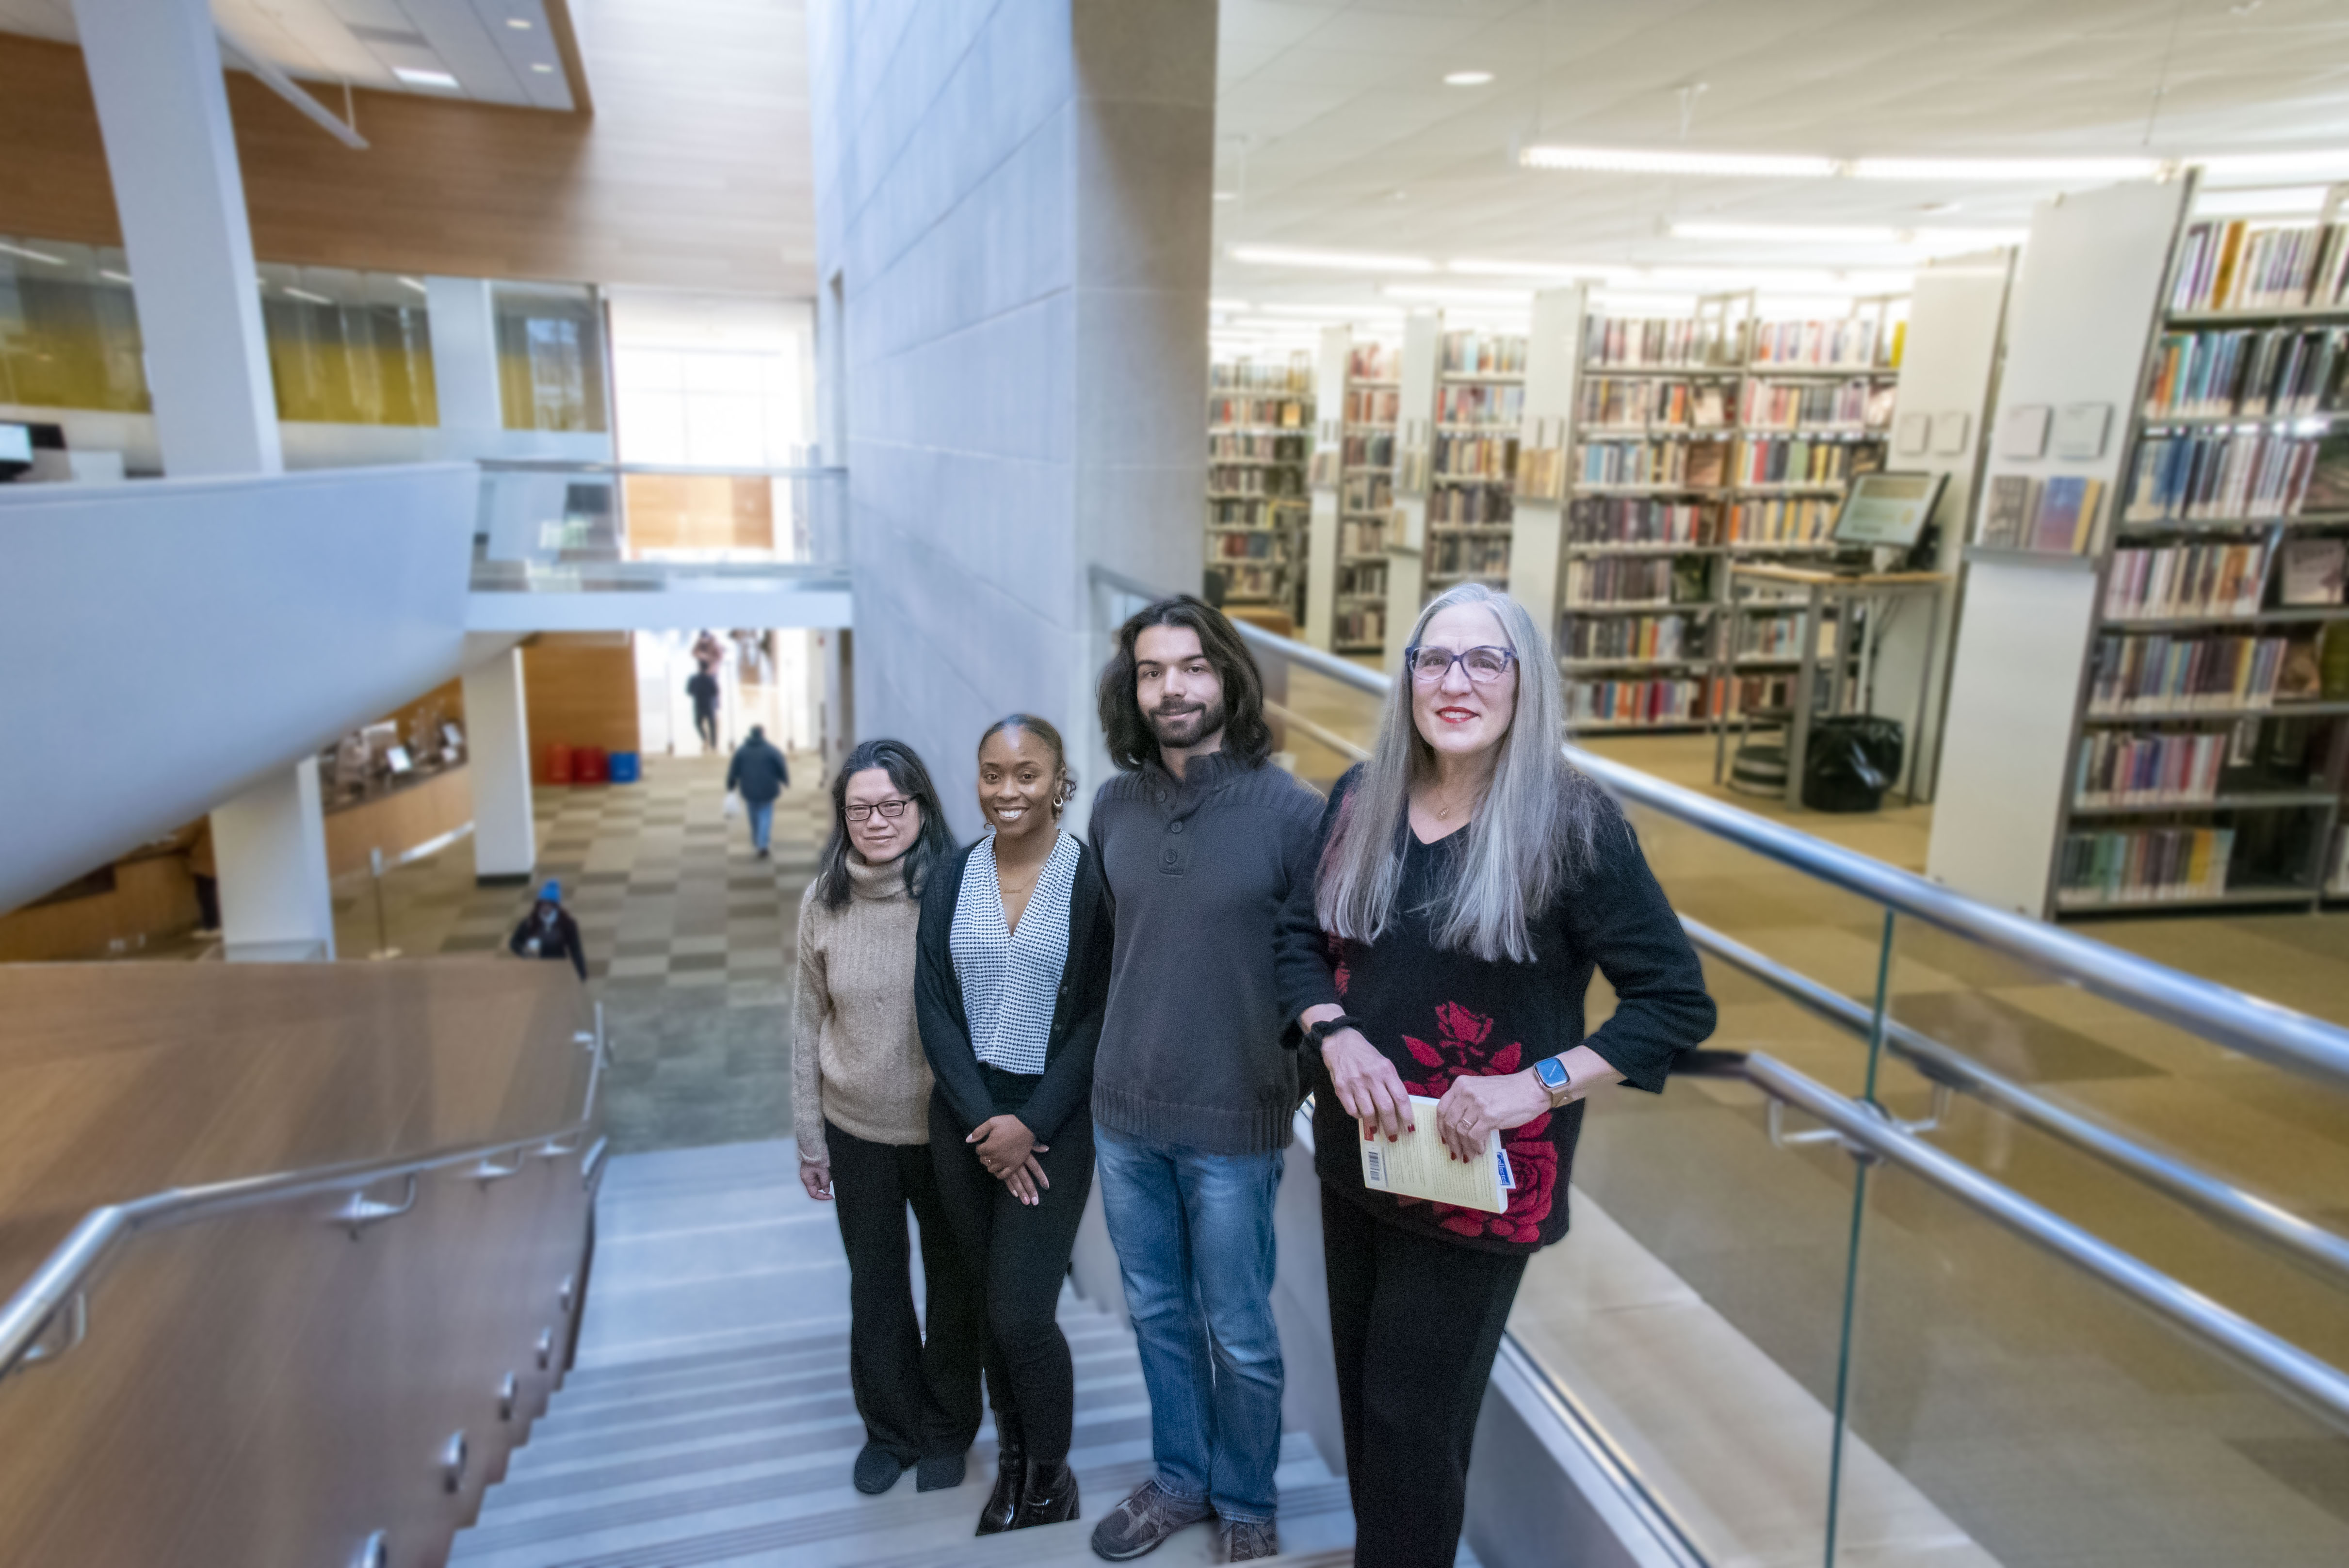 Four researchers posing for a picture on a staircase in a library